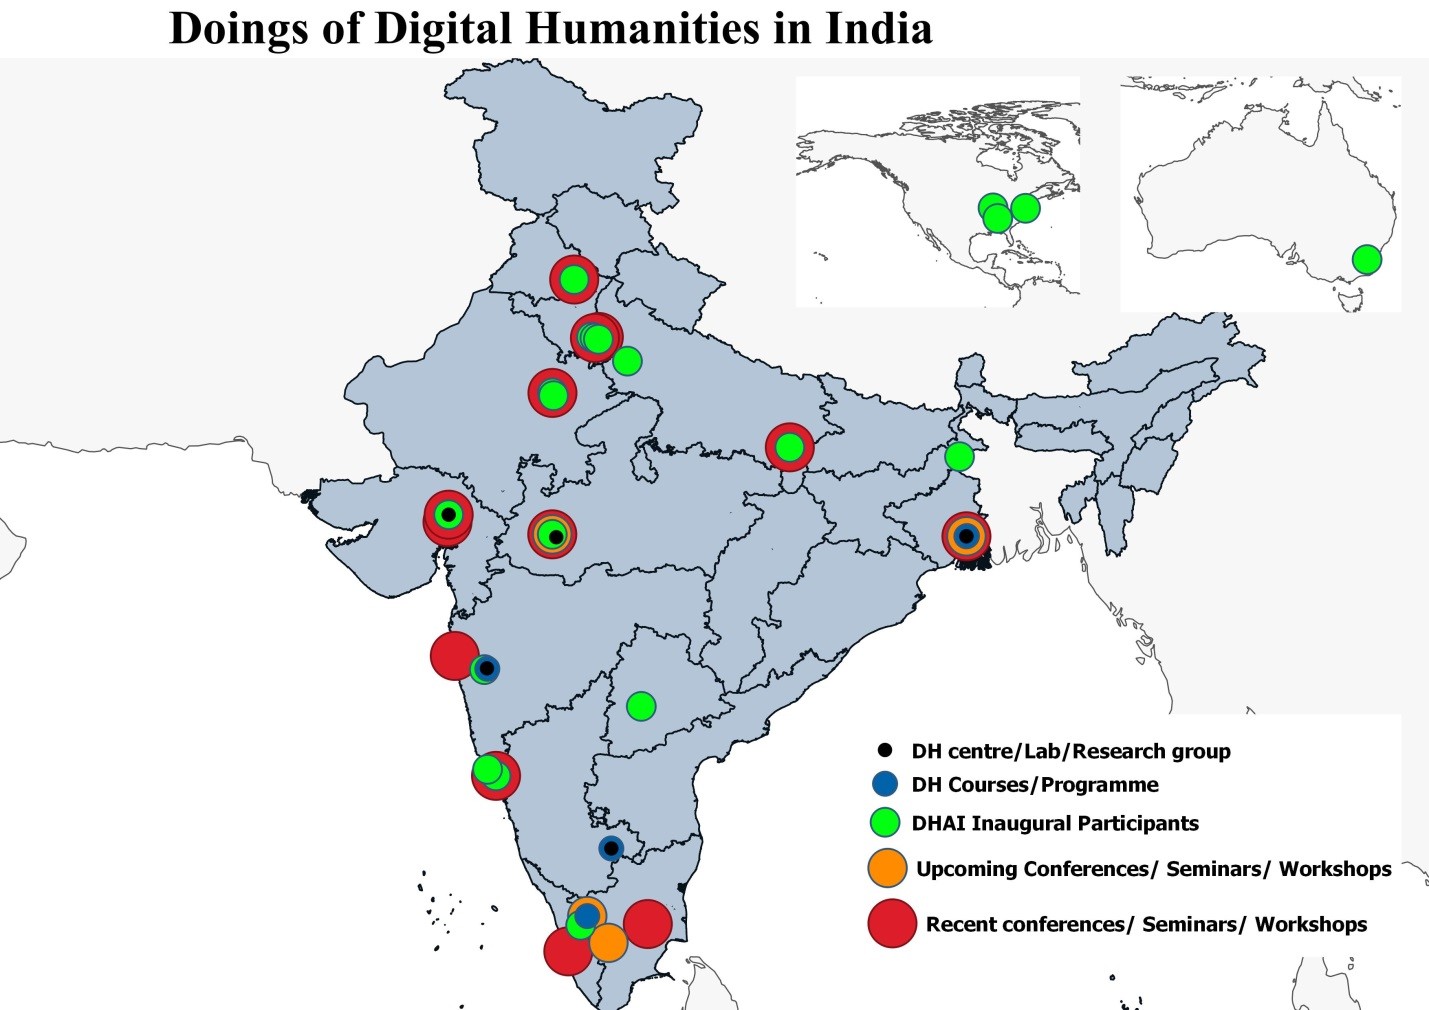 Map of India with circles of various colors to depict locations of
                        research groups, DH courses, DHAI participant locations, and upcoming or
                        recent conferences.